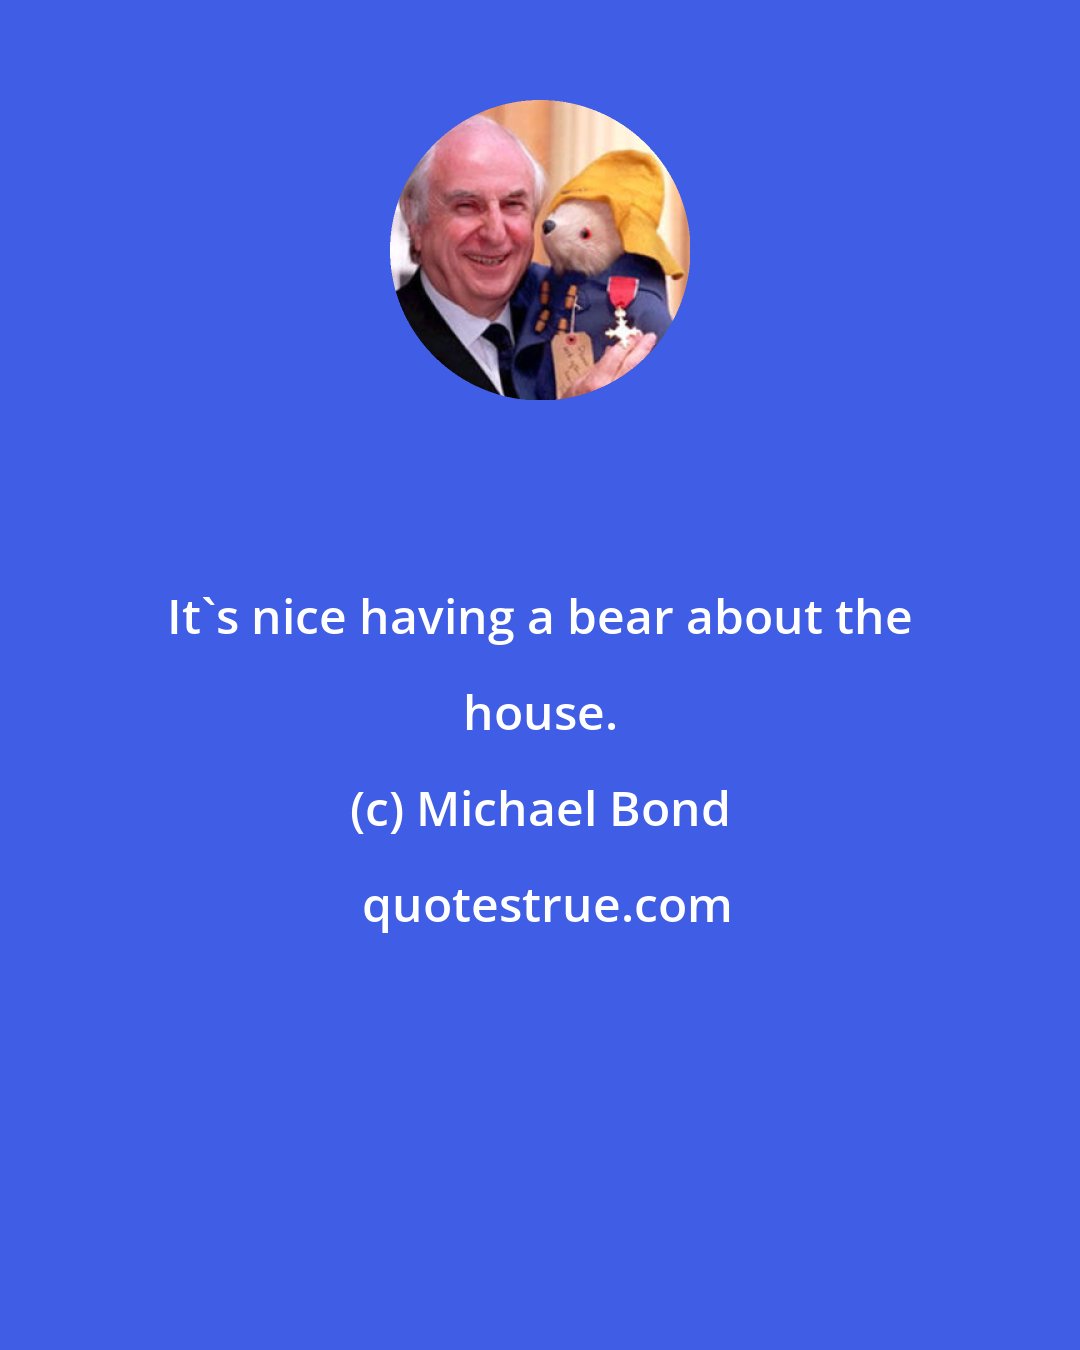 Michael Bond: It's nice having a bear about the house.